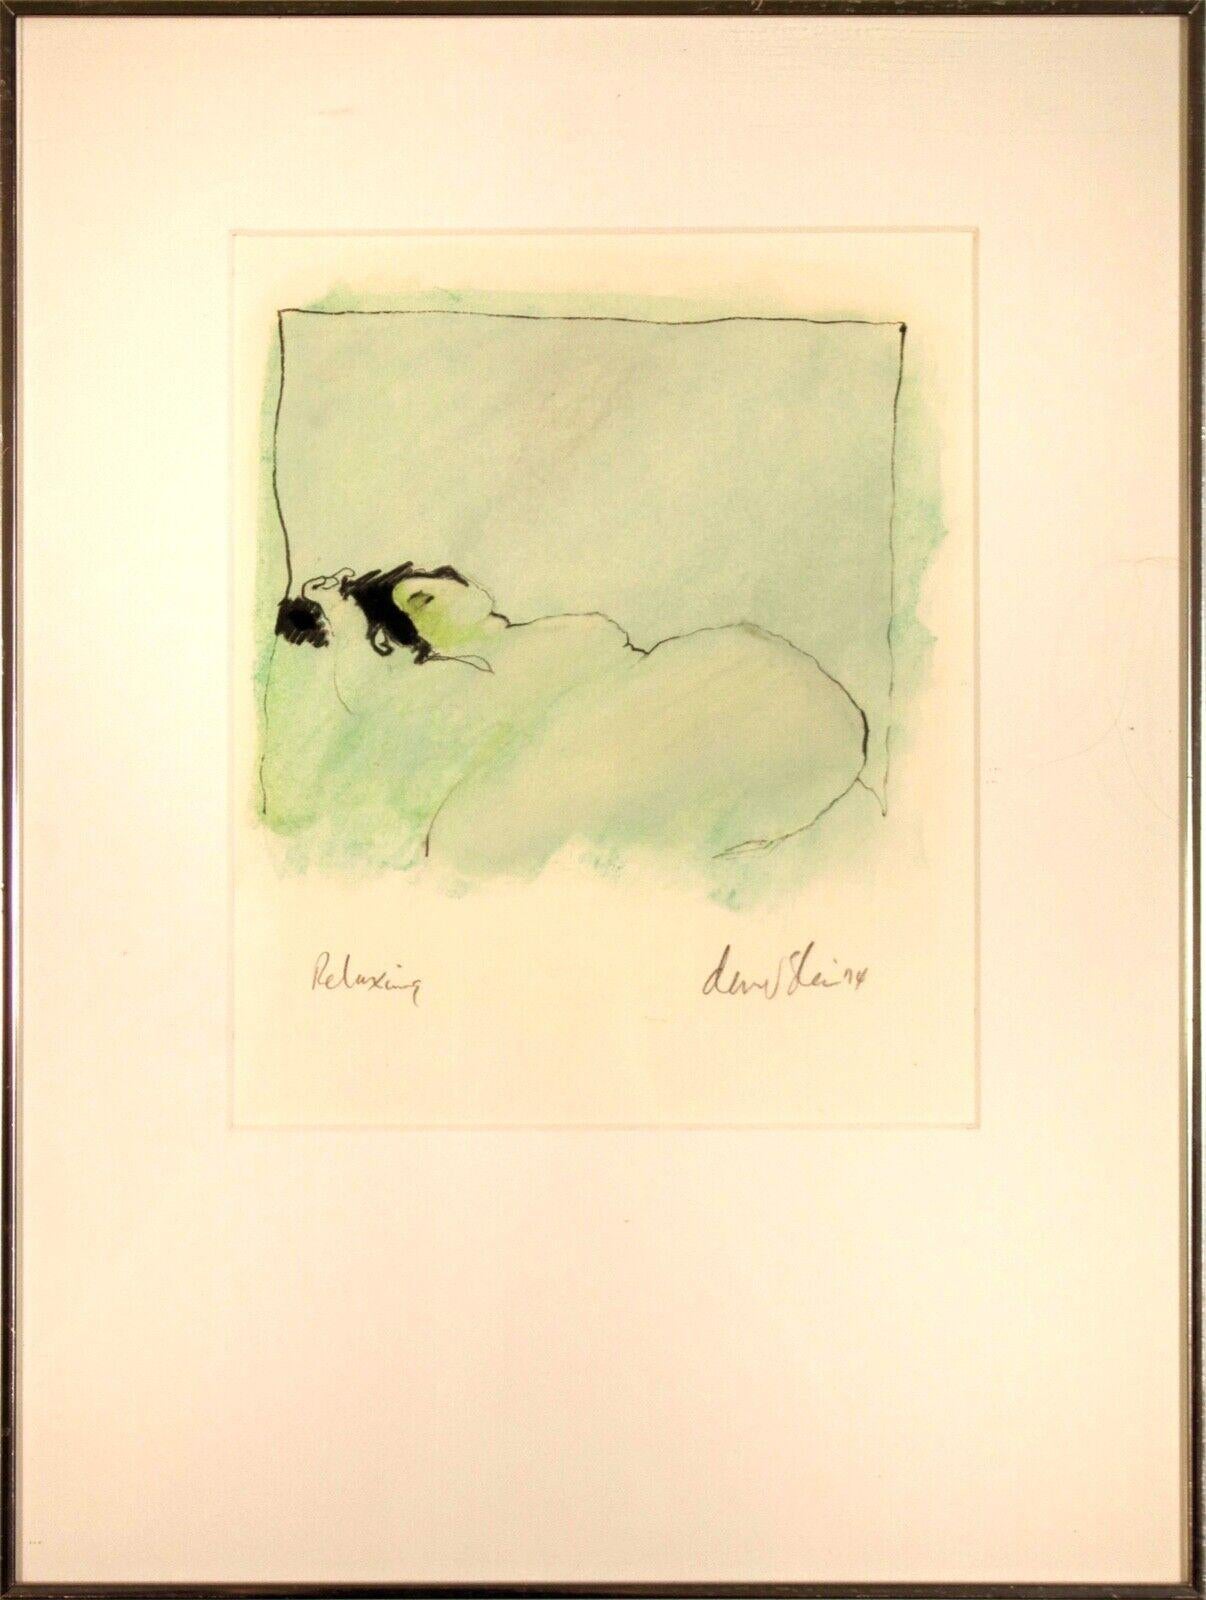 A lovely modern abstracted female nude pastel drawing on paper titled “Relaxing” by David Slee. Hand signed in pencil bottom right and dated 1974. Titled bottom right. A minimalistic line drawing creates a serene reclining female nude with abstract